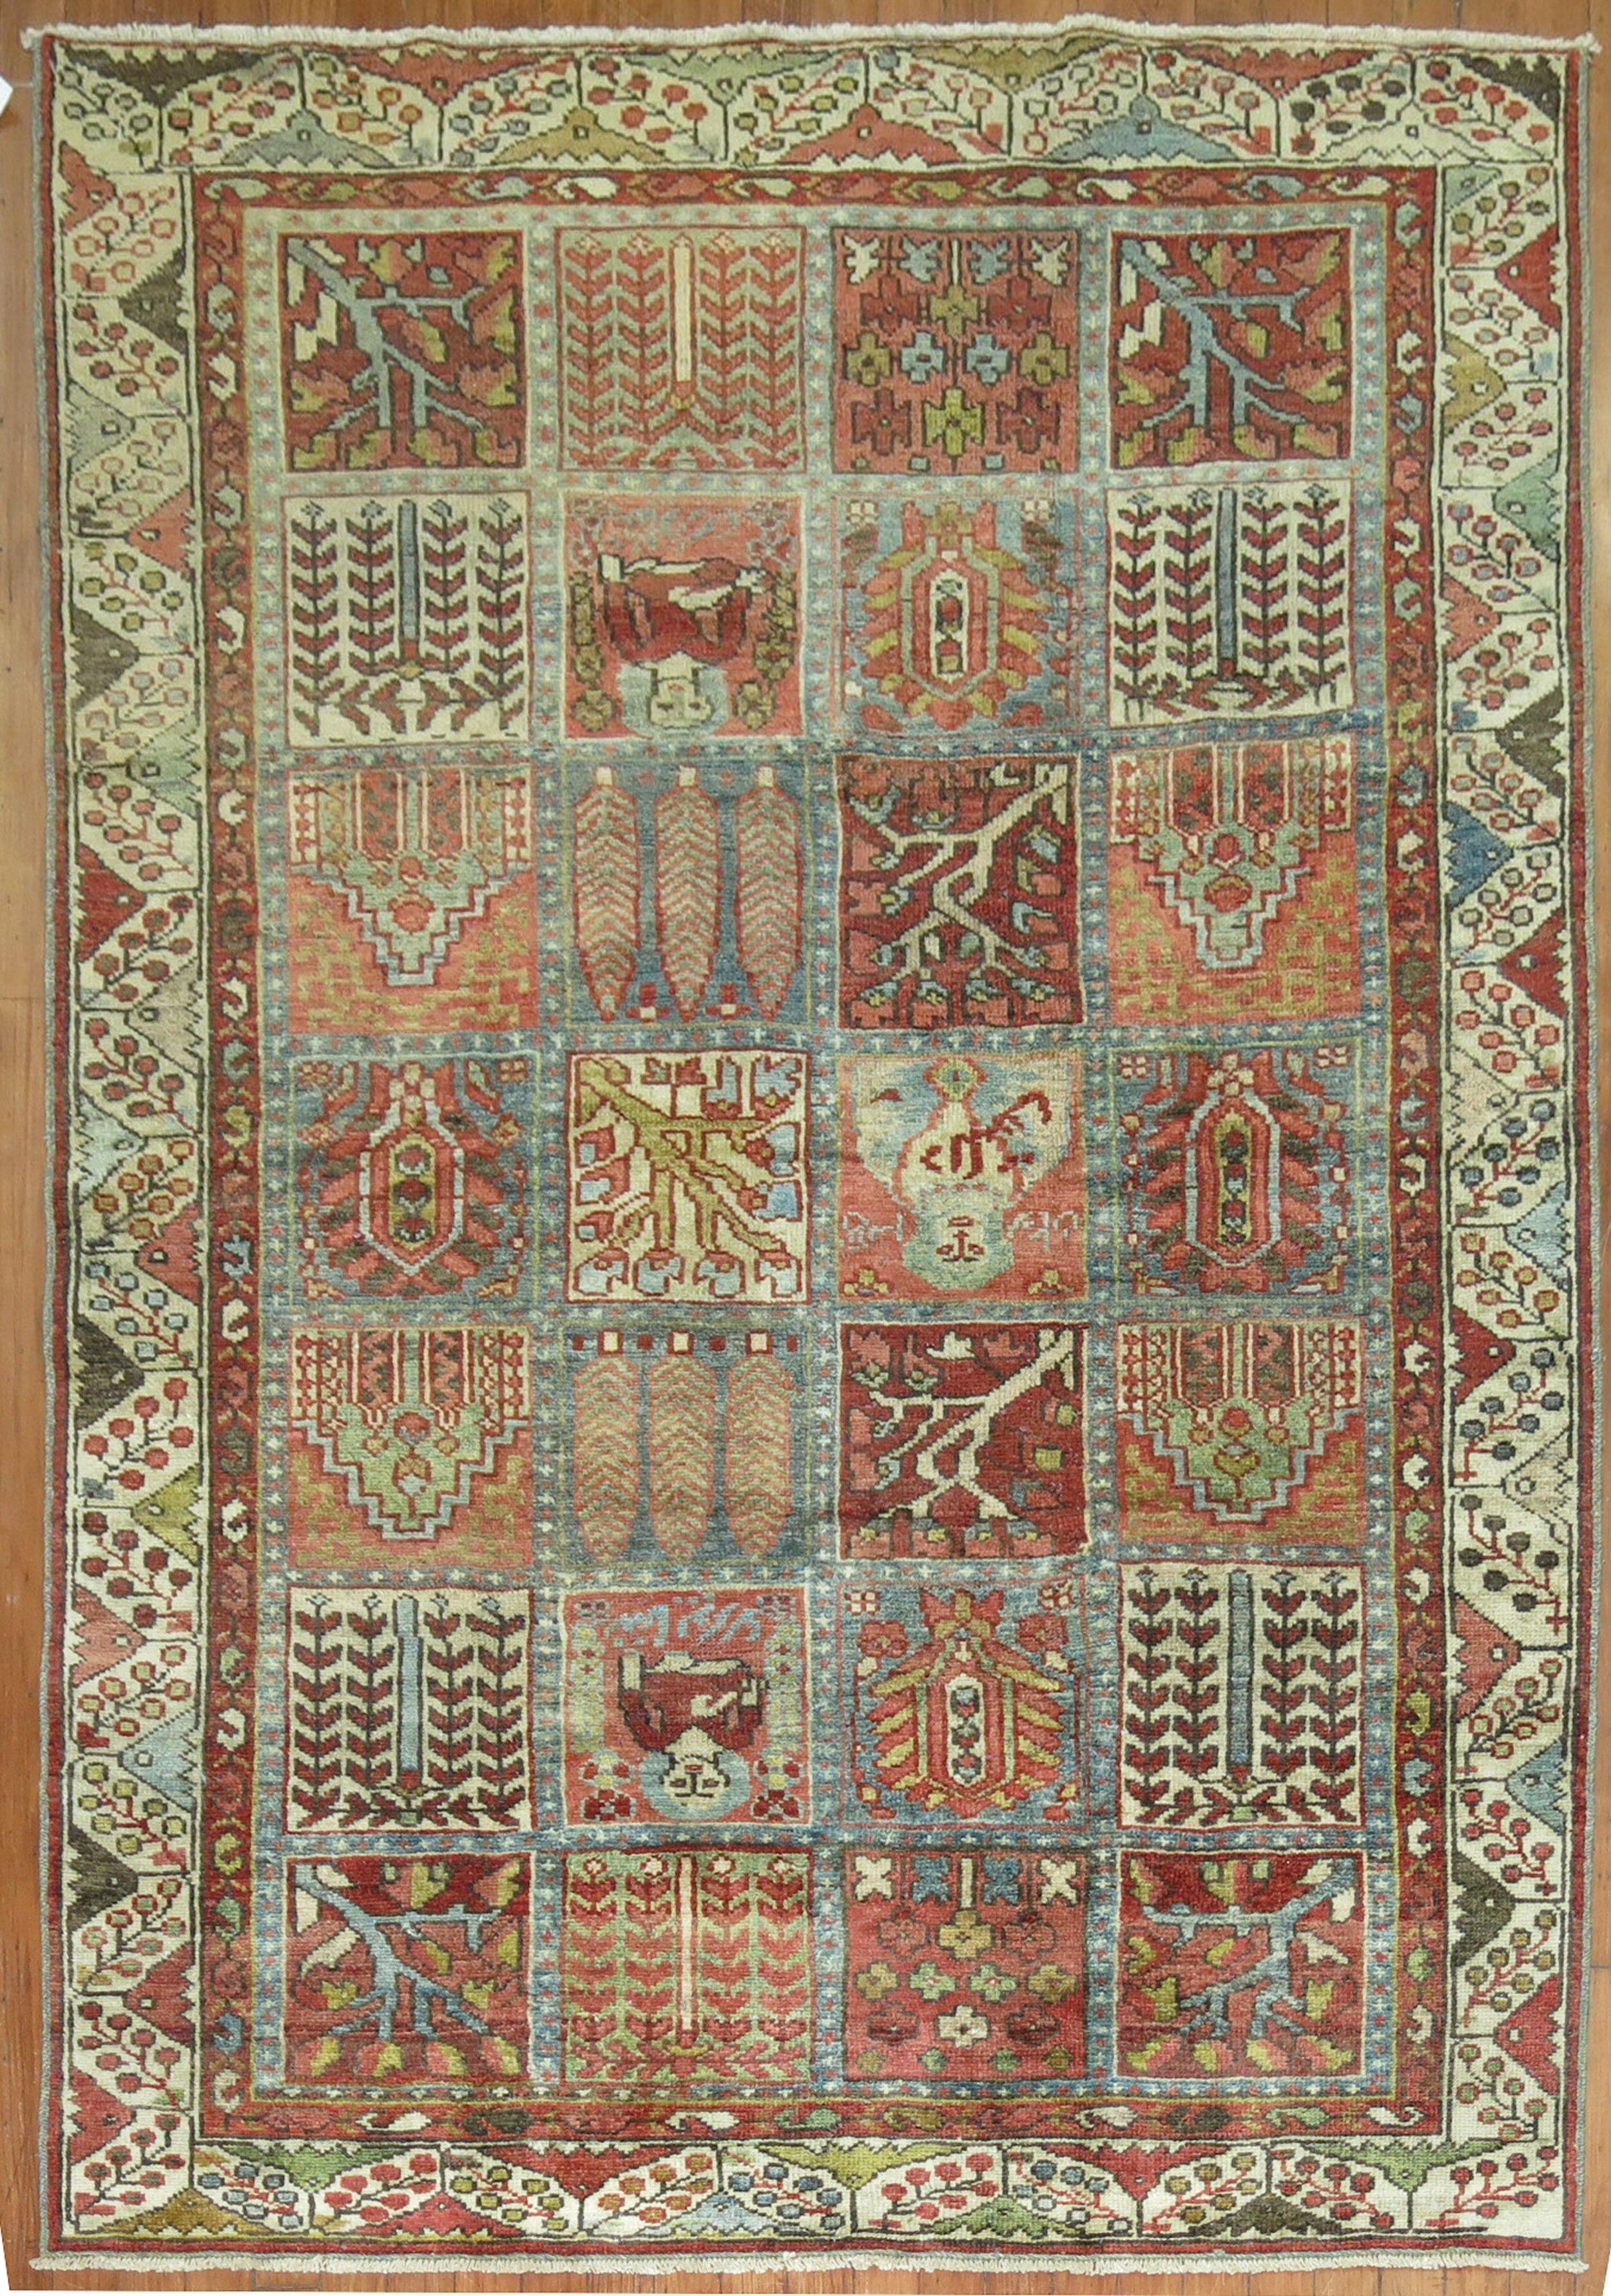 An accent size early 20th century Persian Malayer rug with a garden box design in an assortment of colors

Measures: 4'5